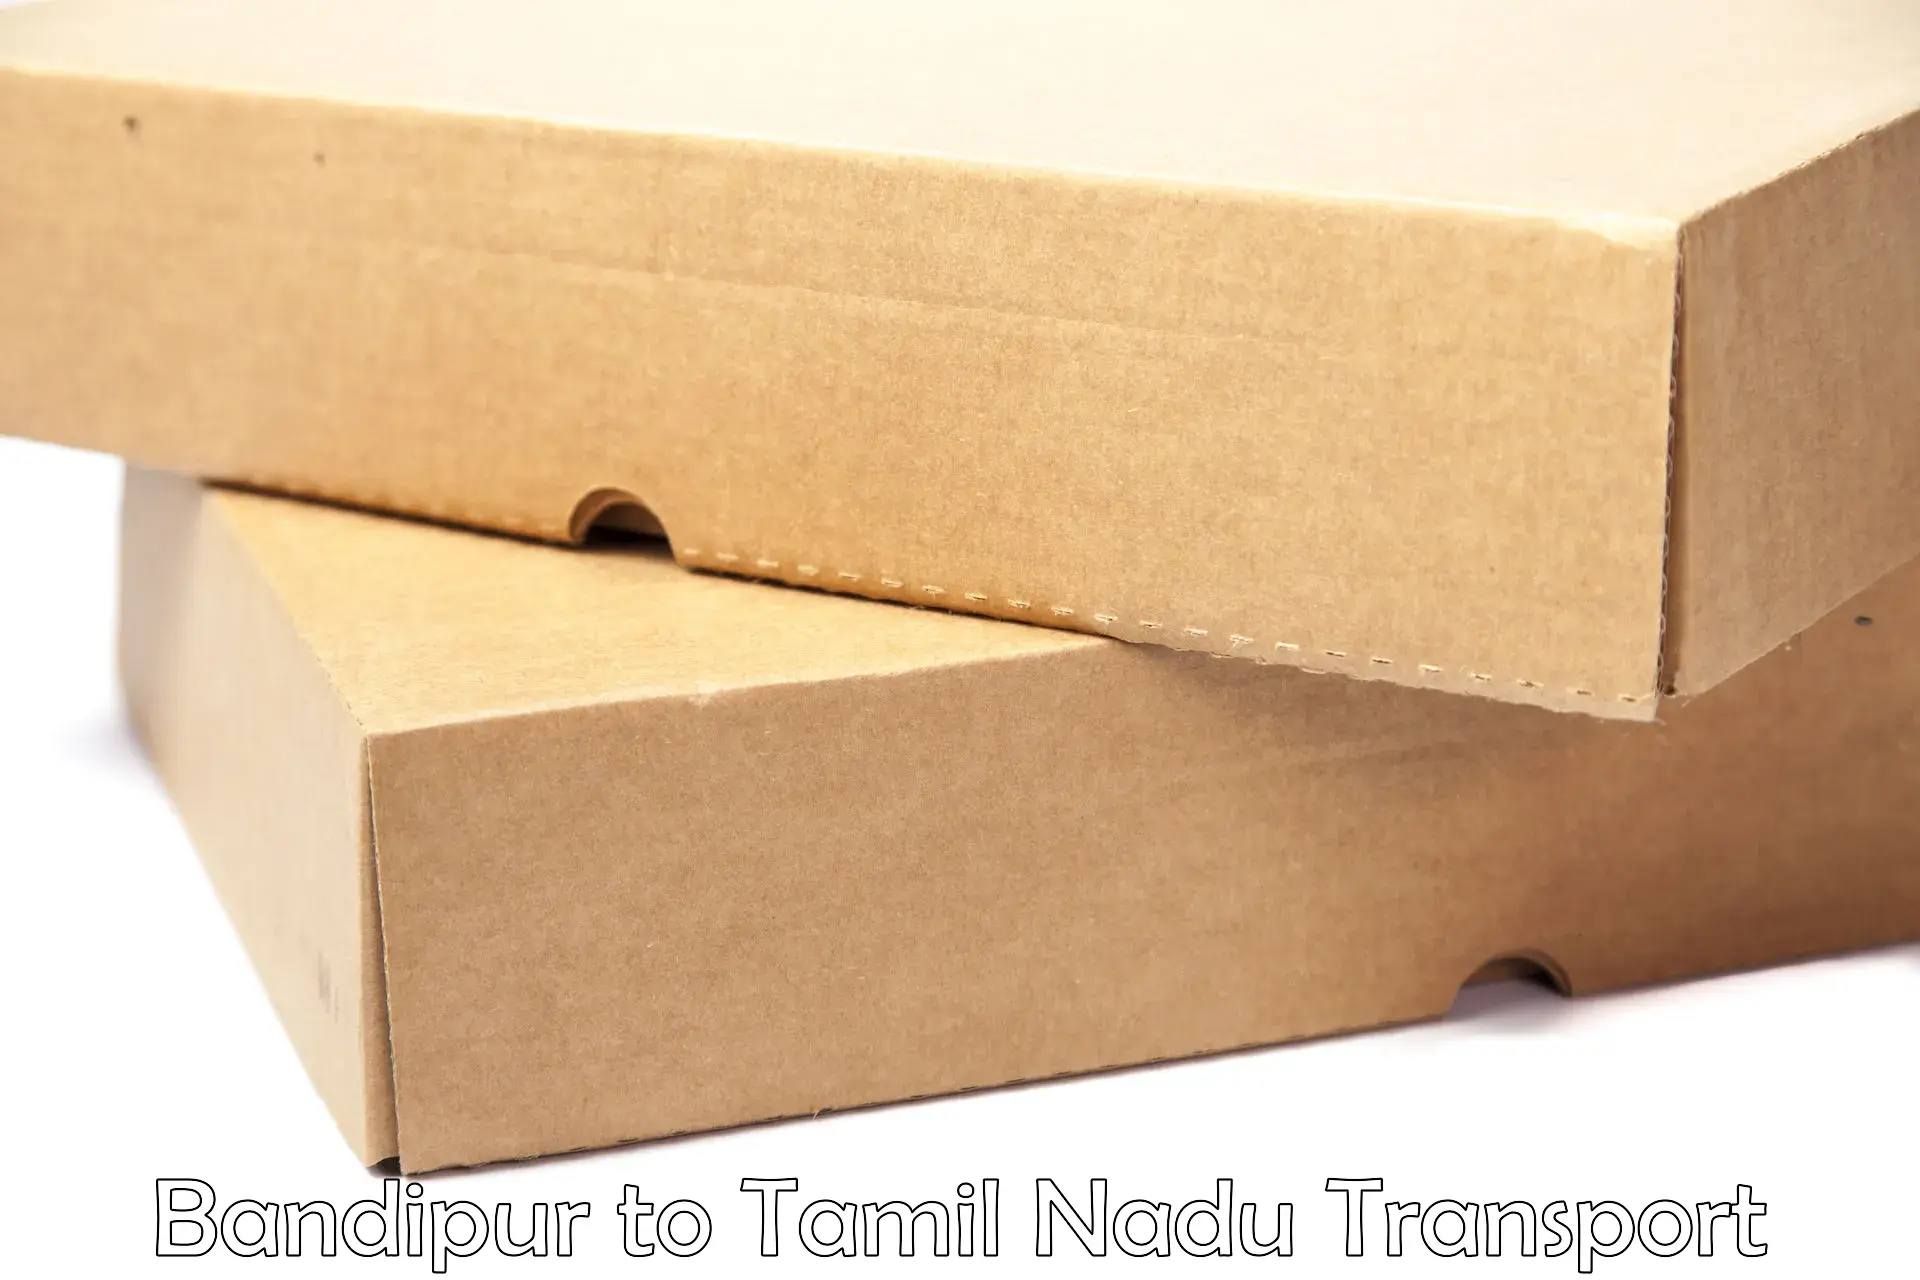 Goods delivery service Bandipur to Tiruvallur